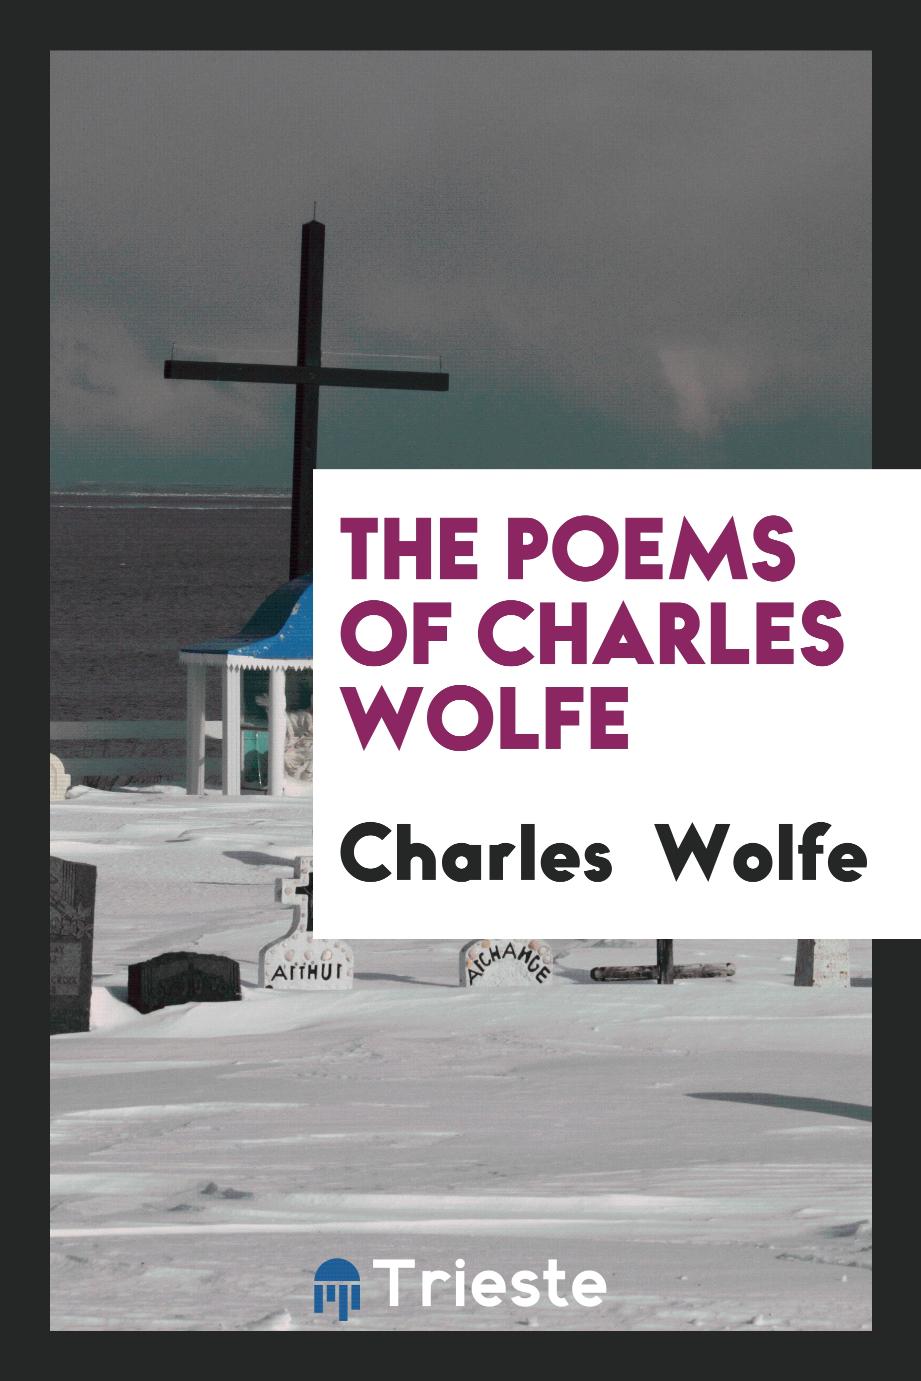 The Poems of Charles Wolfe